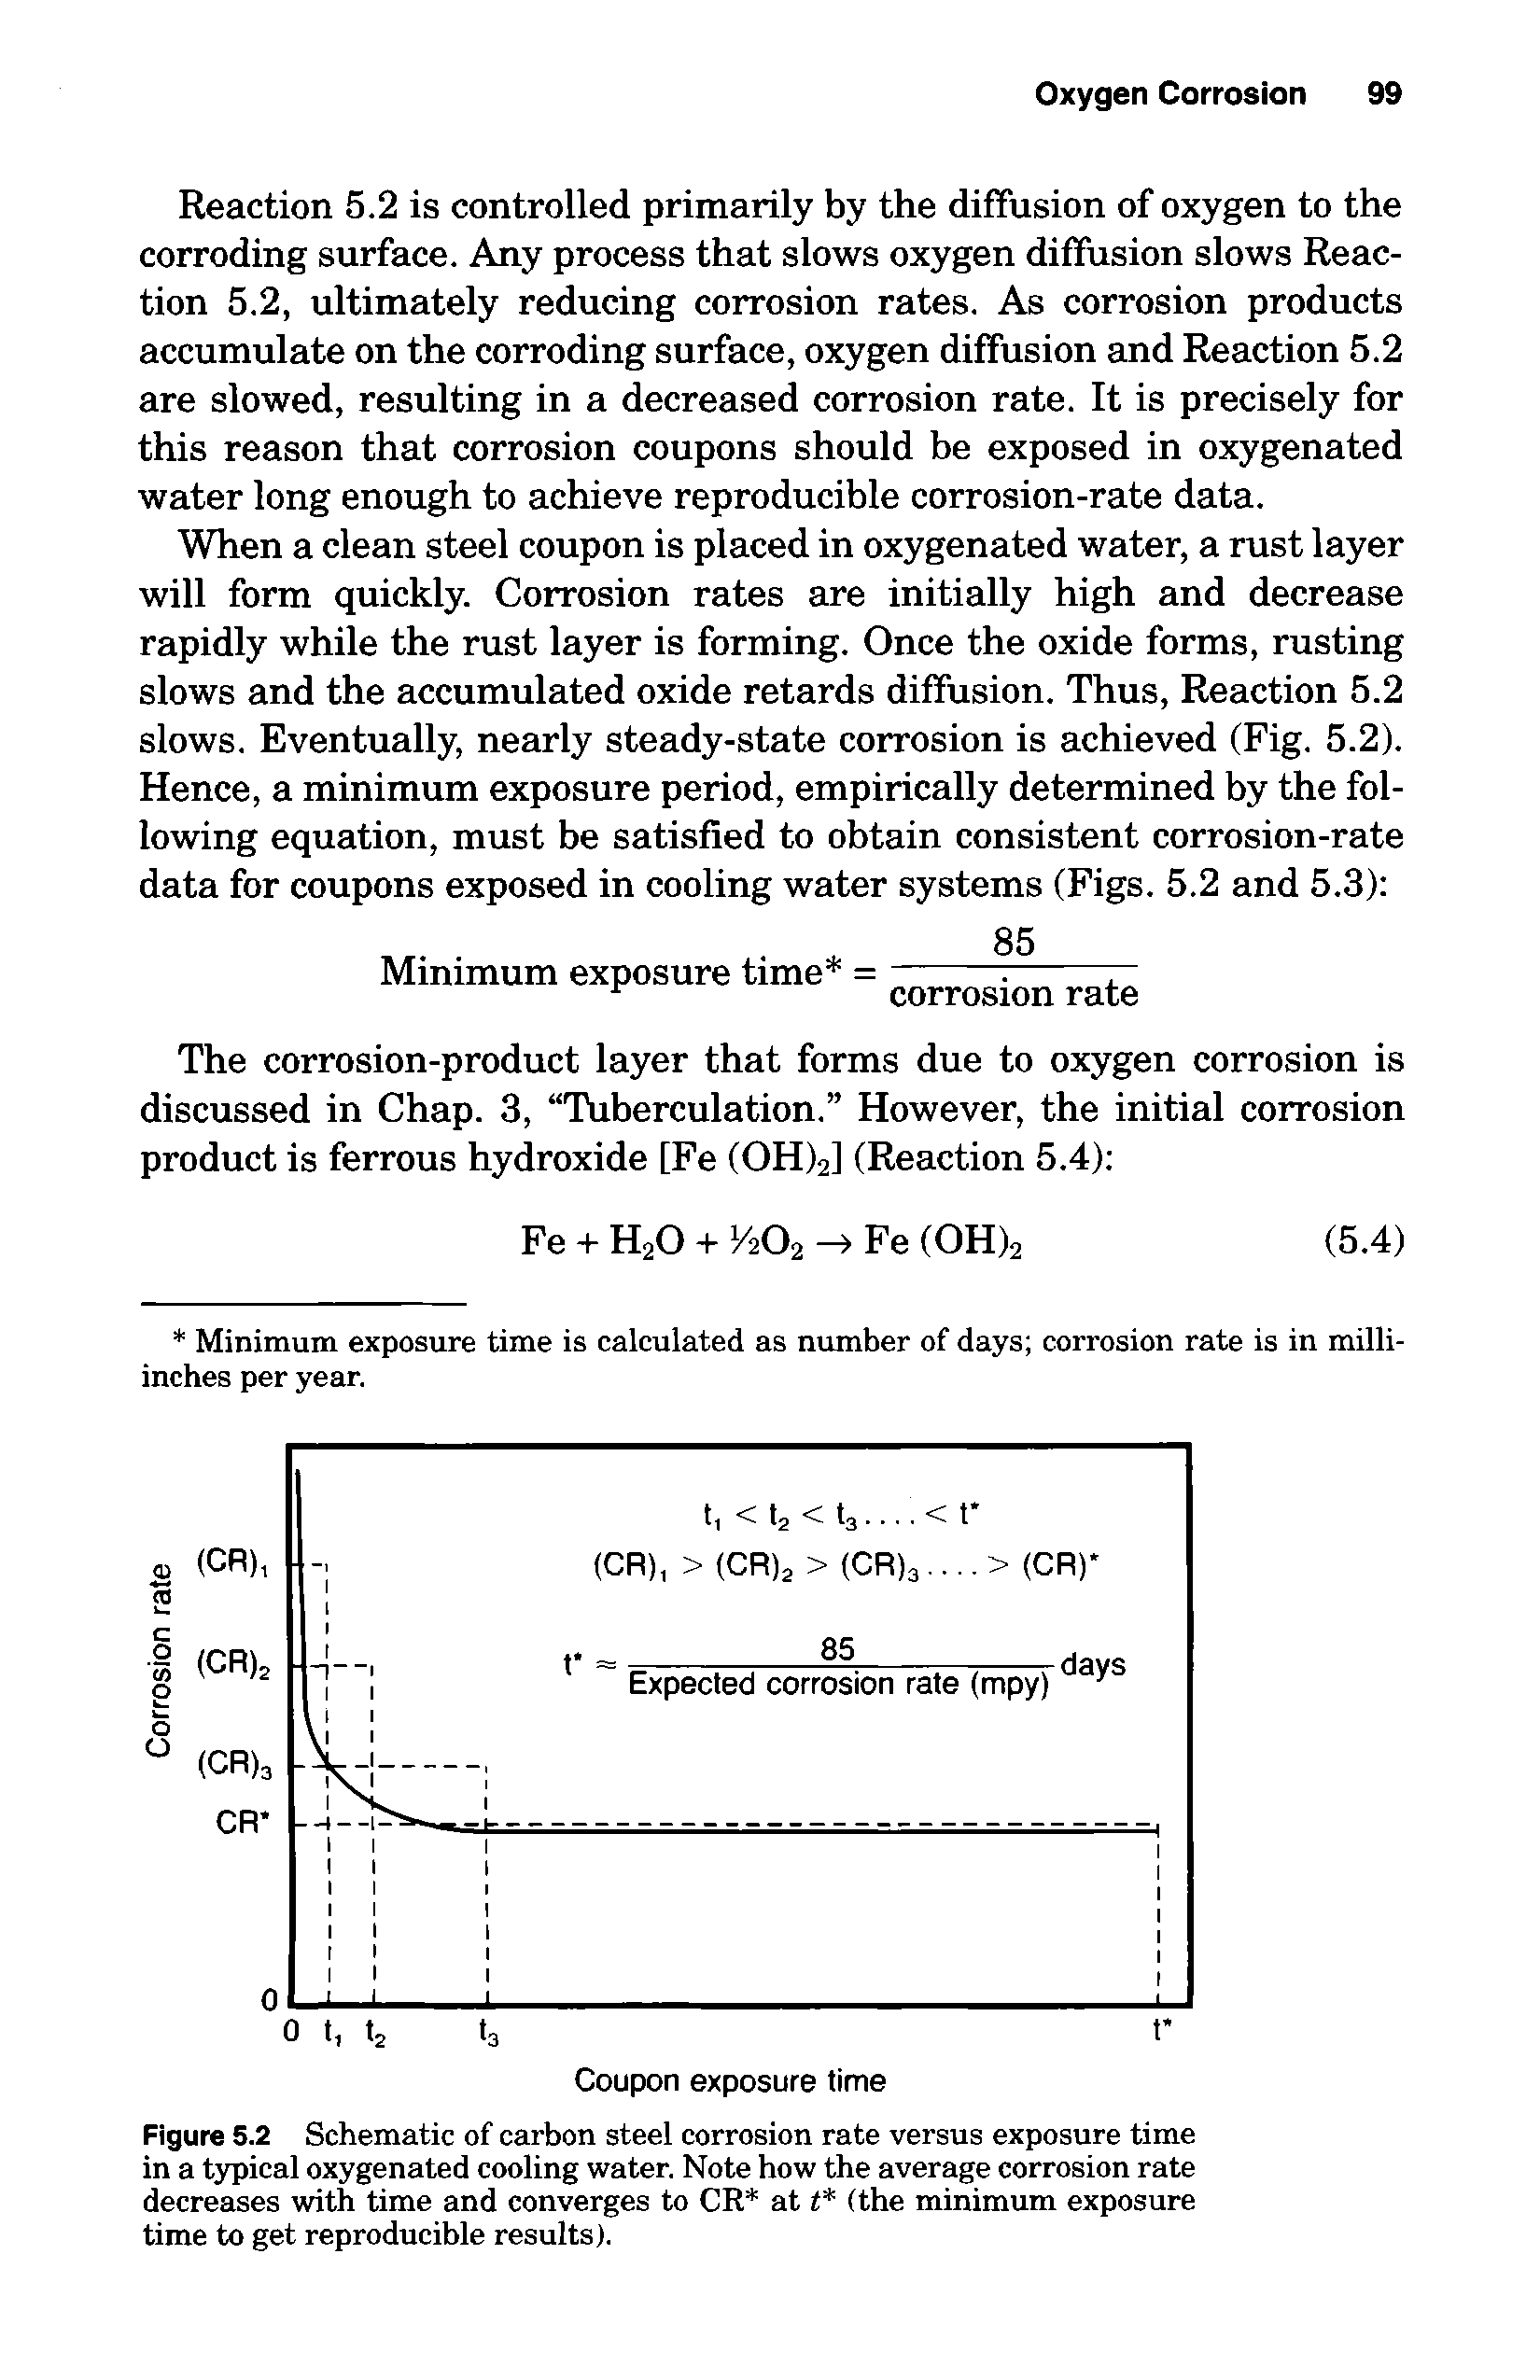 Figure 5.2 Schematic of carbon steel corrosion rate versus exposure time in a typical oxygenated cooling water. Note how the average corrosion rate decreases with time and converges to CR at t (the minimum exposure time to get reproducible results).